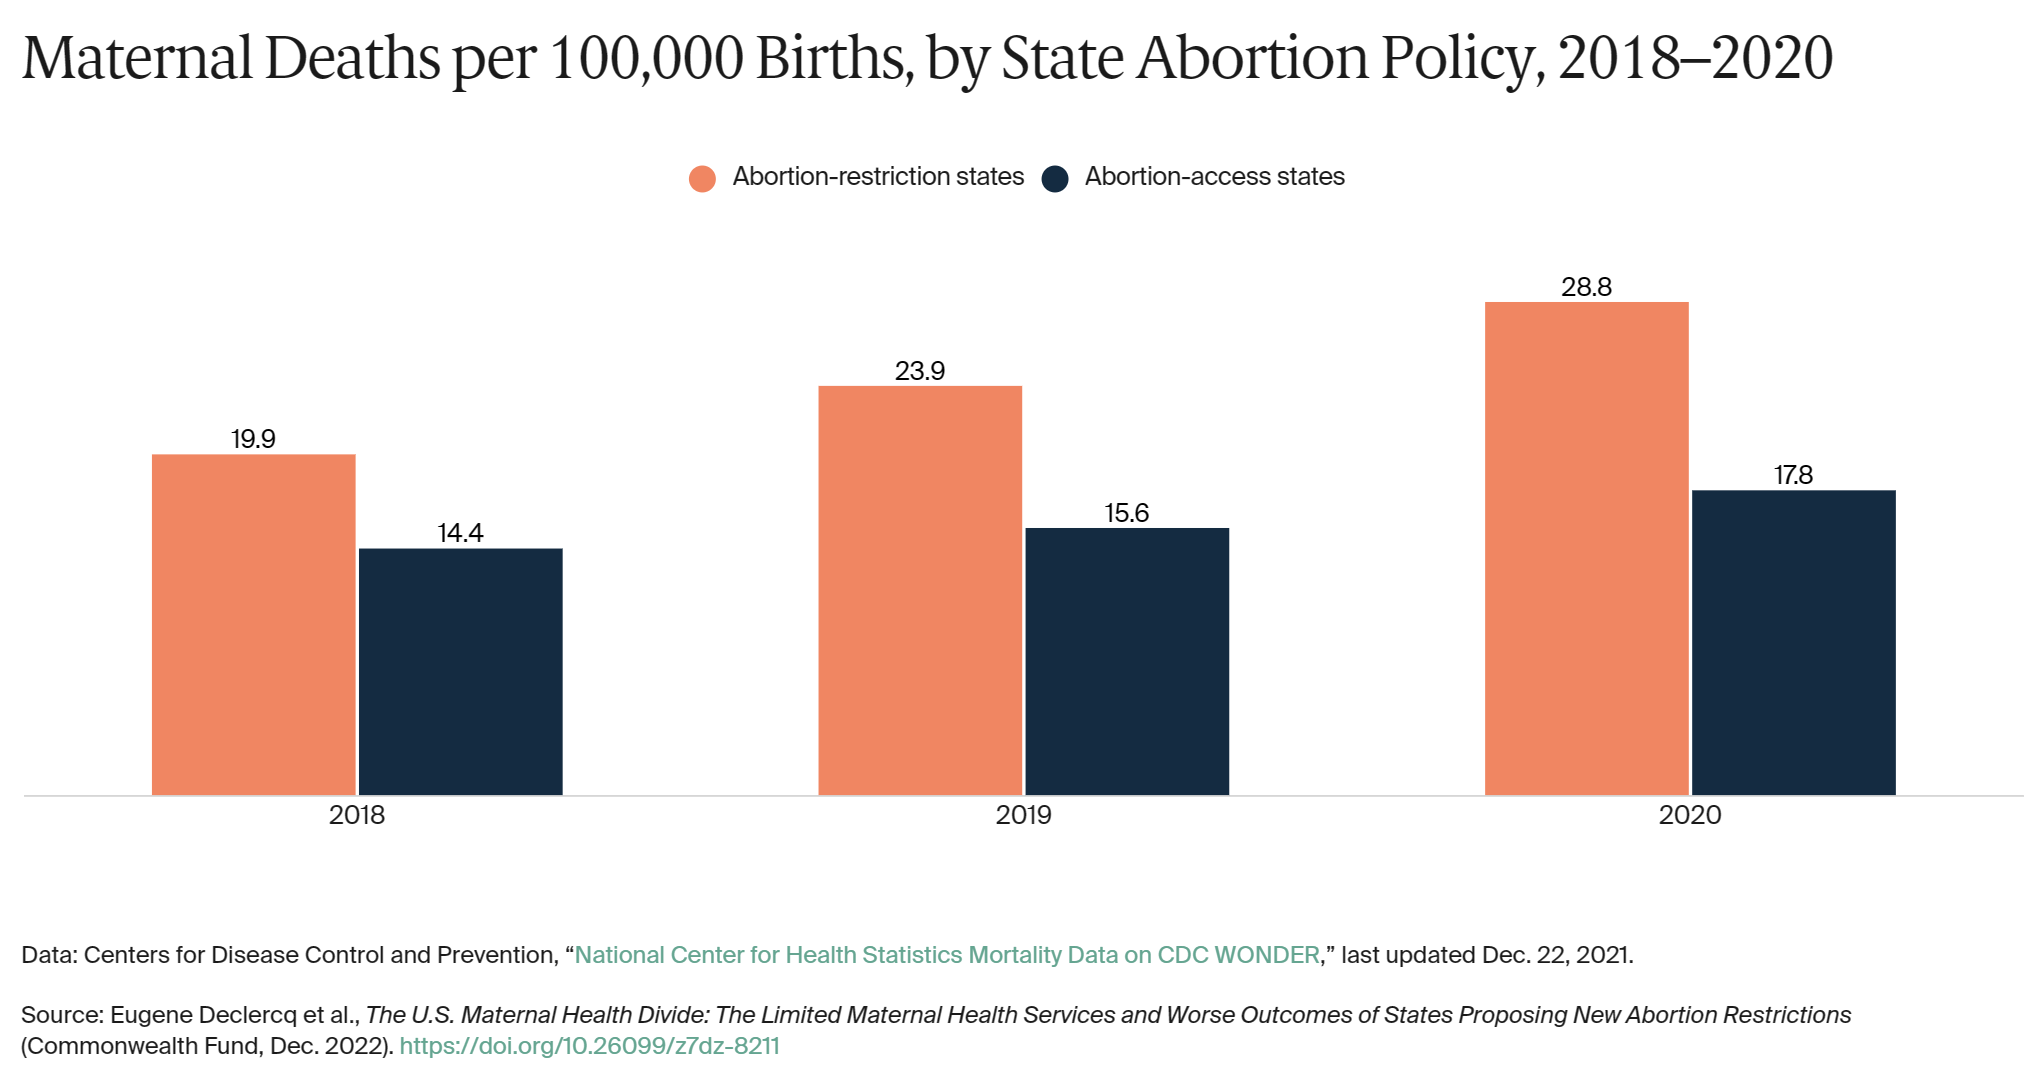 Maternal Deaths per 100,000 Births, by State Abortion Policy, 2018-2020. Graphic: Commonwealth Fund